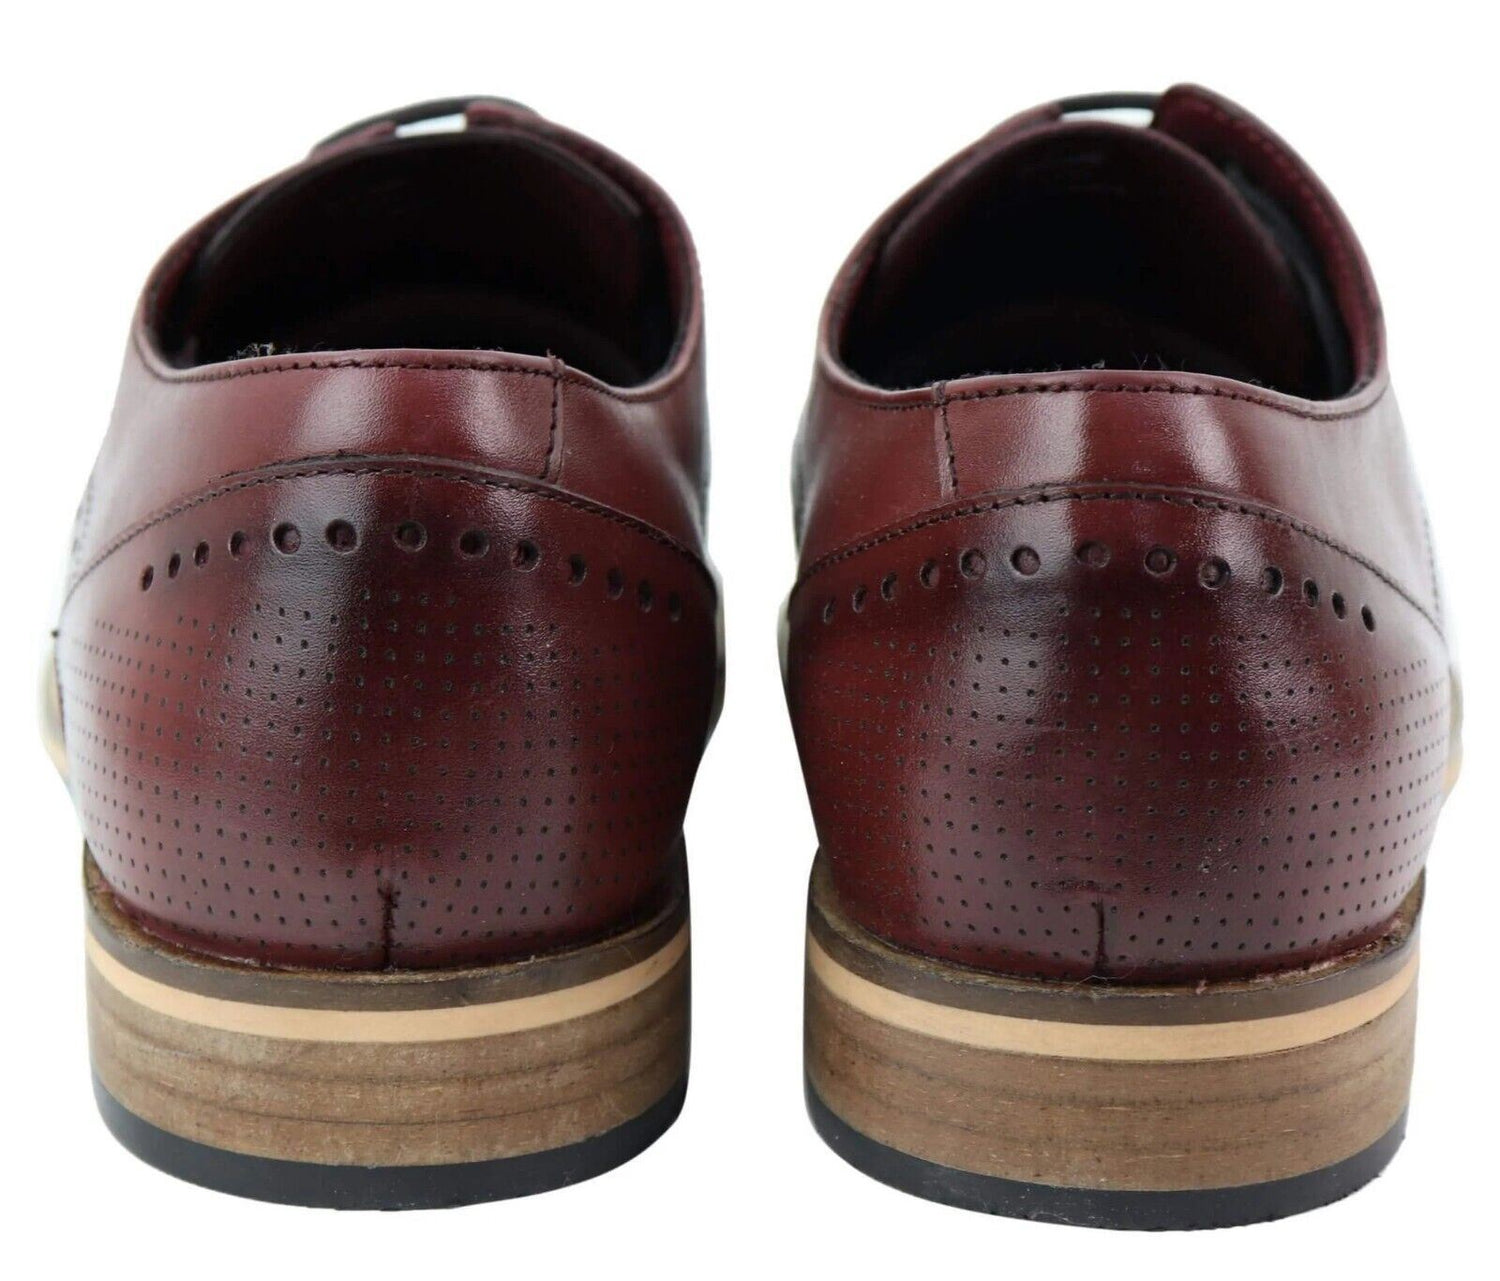 Mens Classic Oxford Brogue Shoes in Perforated Wine Leather - Upperclass Fashions 